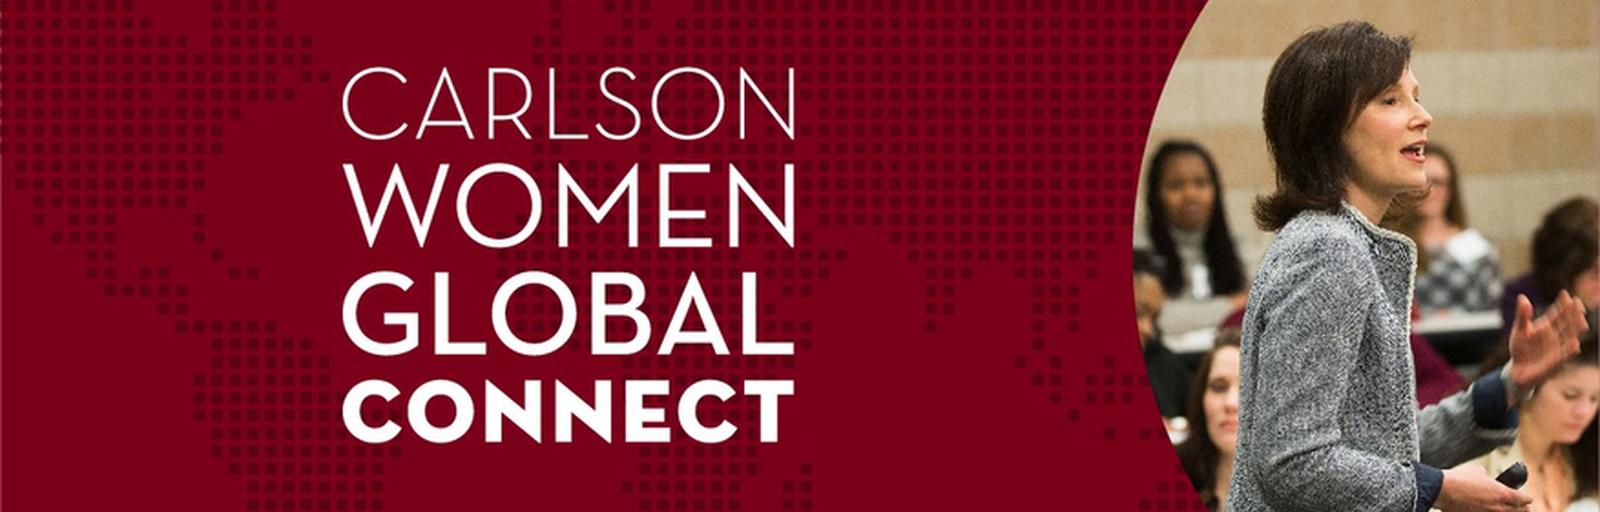 Carlson Women Global Connect Event Image